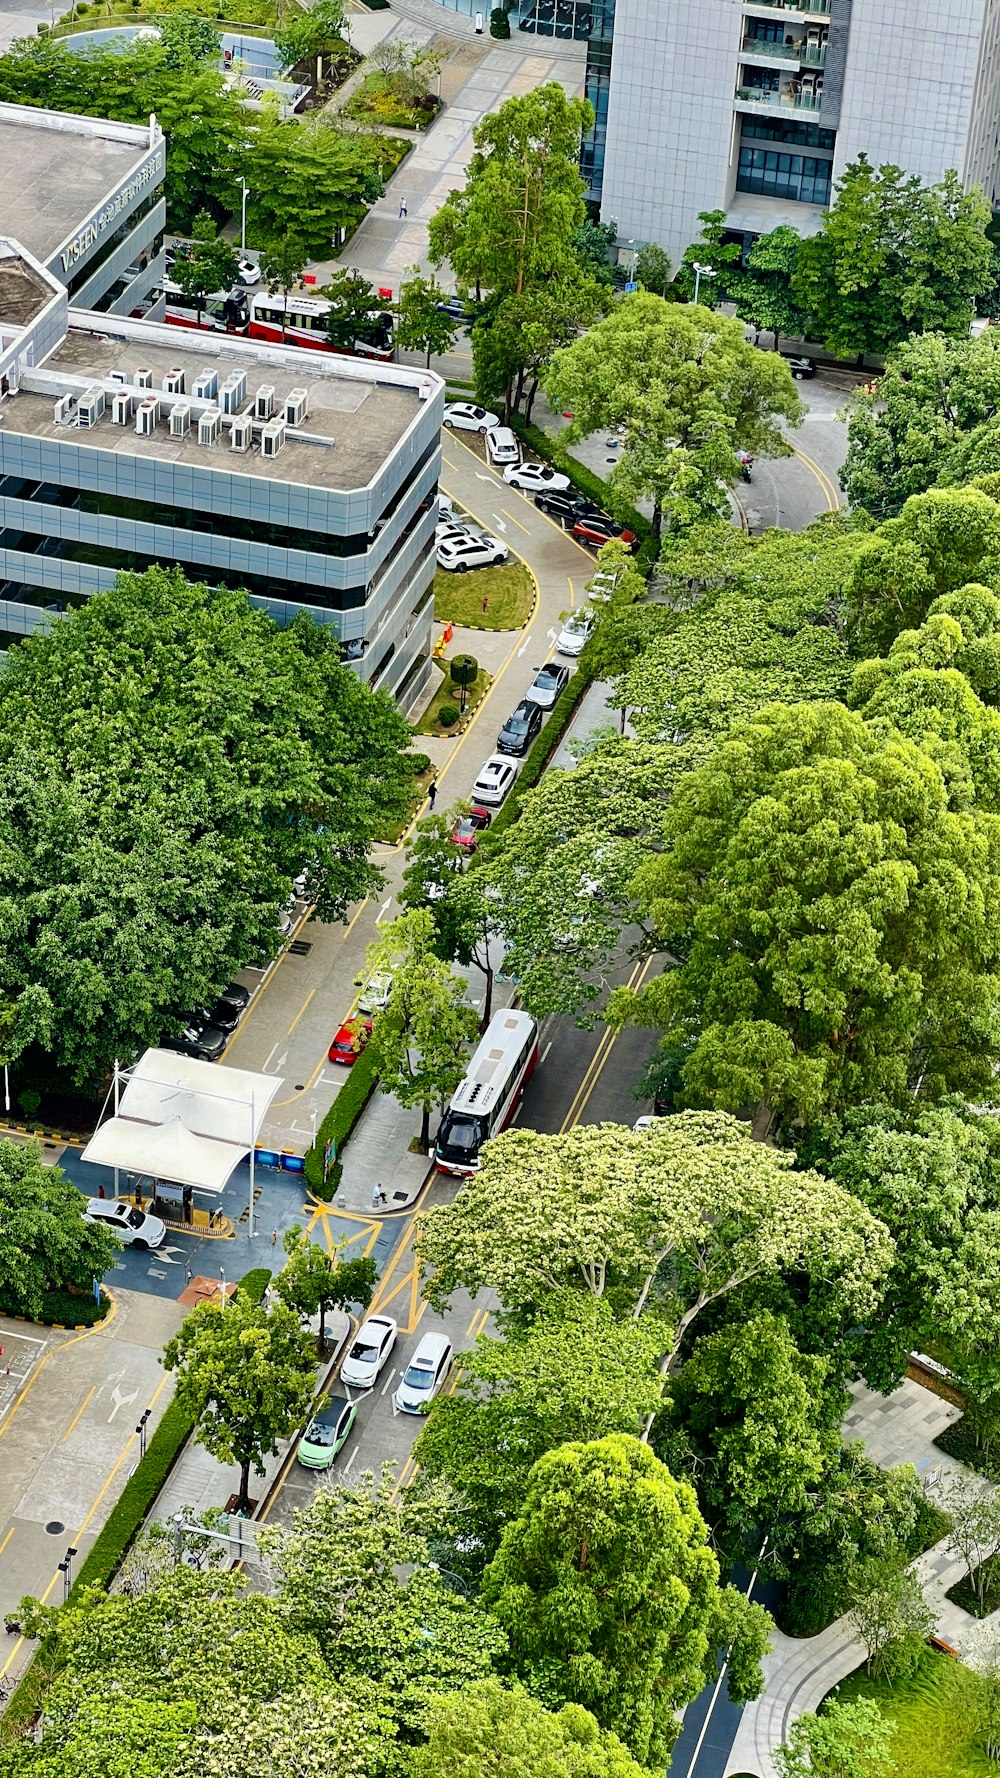 an aerial view of a city street with trees and buildings